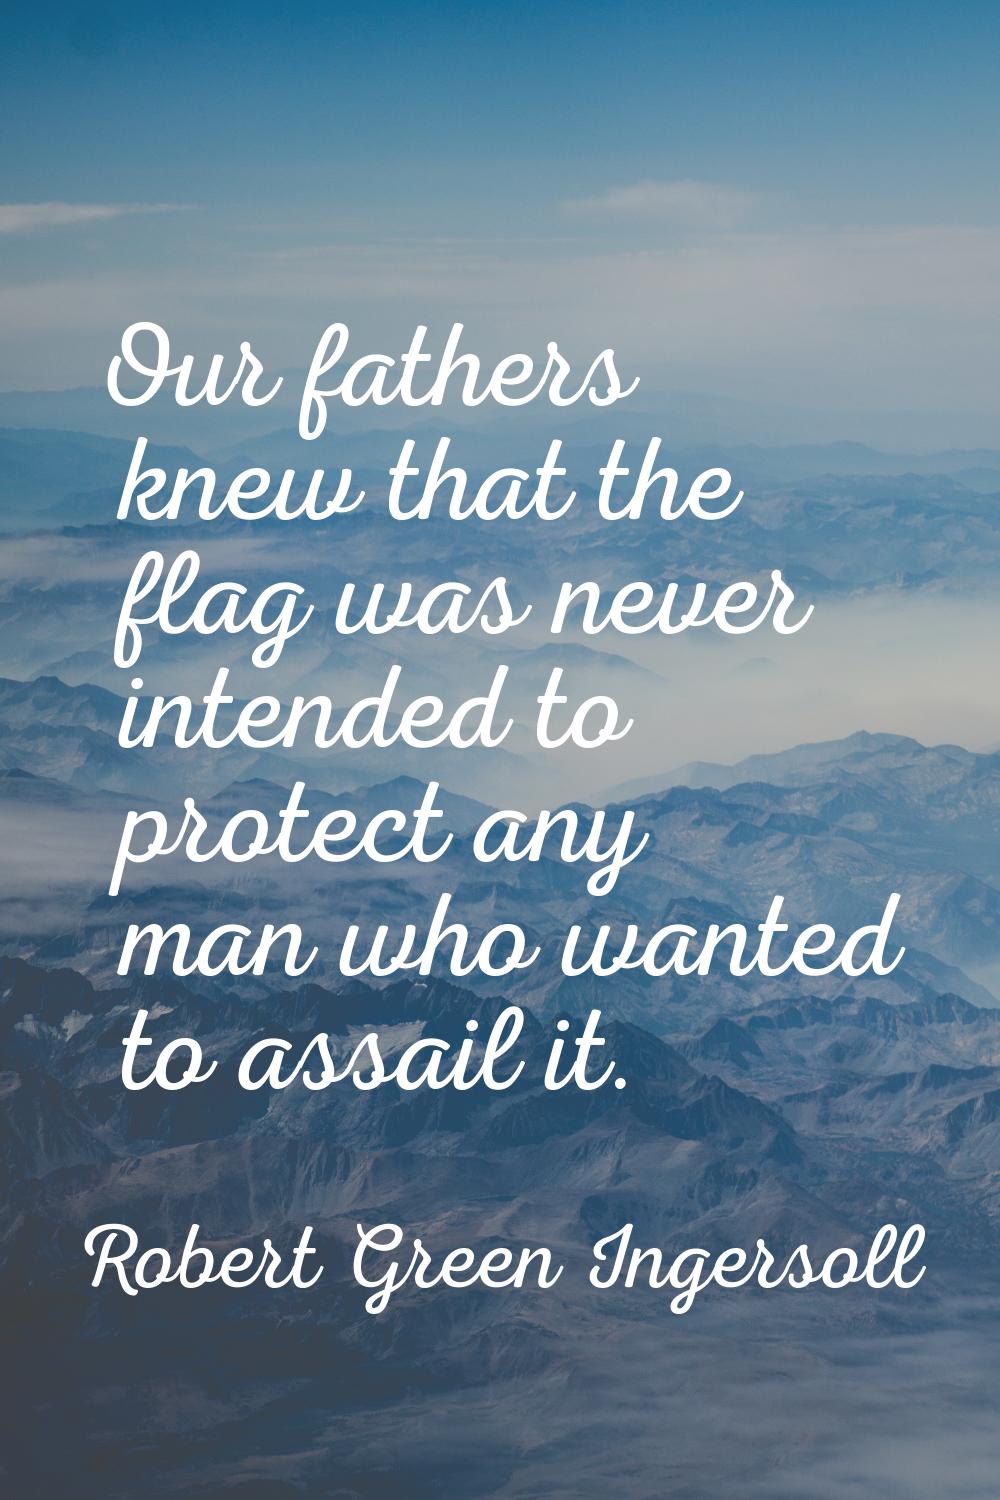 Our fathers knew that the flag was never intended to protect any man who wanted to assail it.